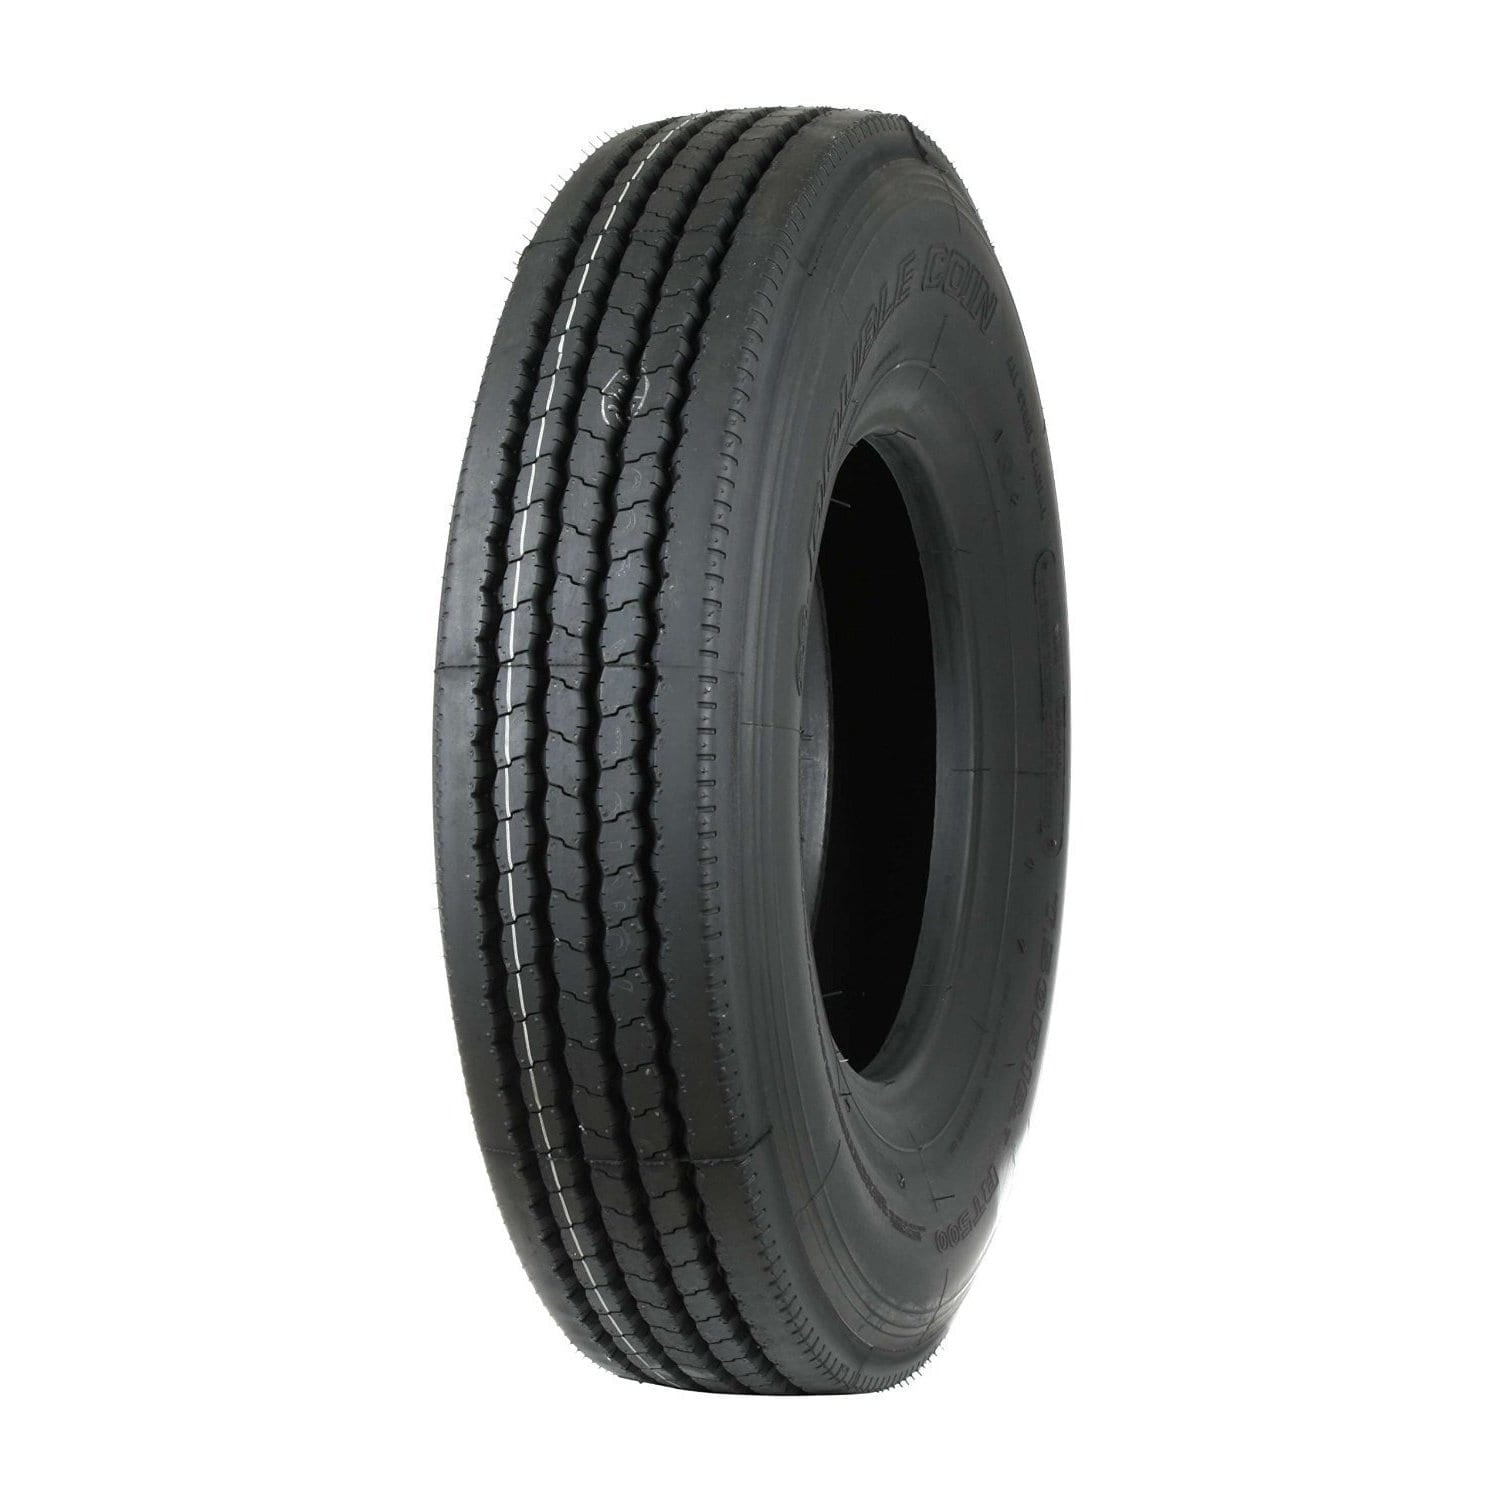 8R17.5 12 ply Double Coin RT500 Premium Low Profile All-Position Multi-Use Commercial Radial Truck Tire 